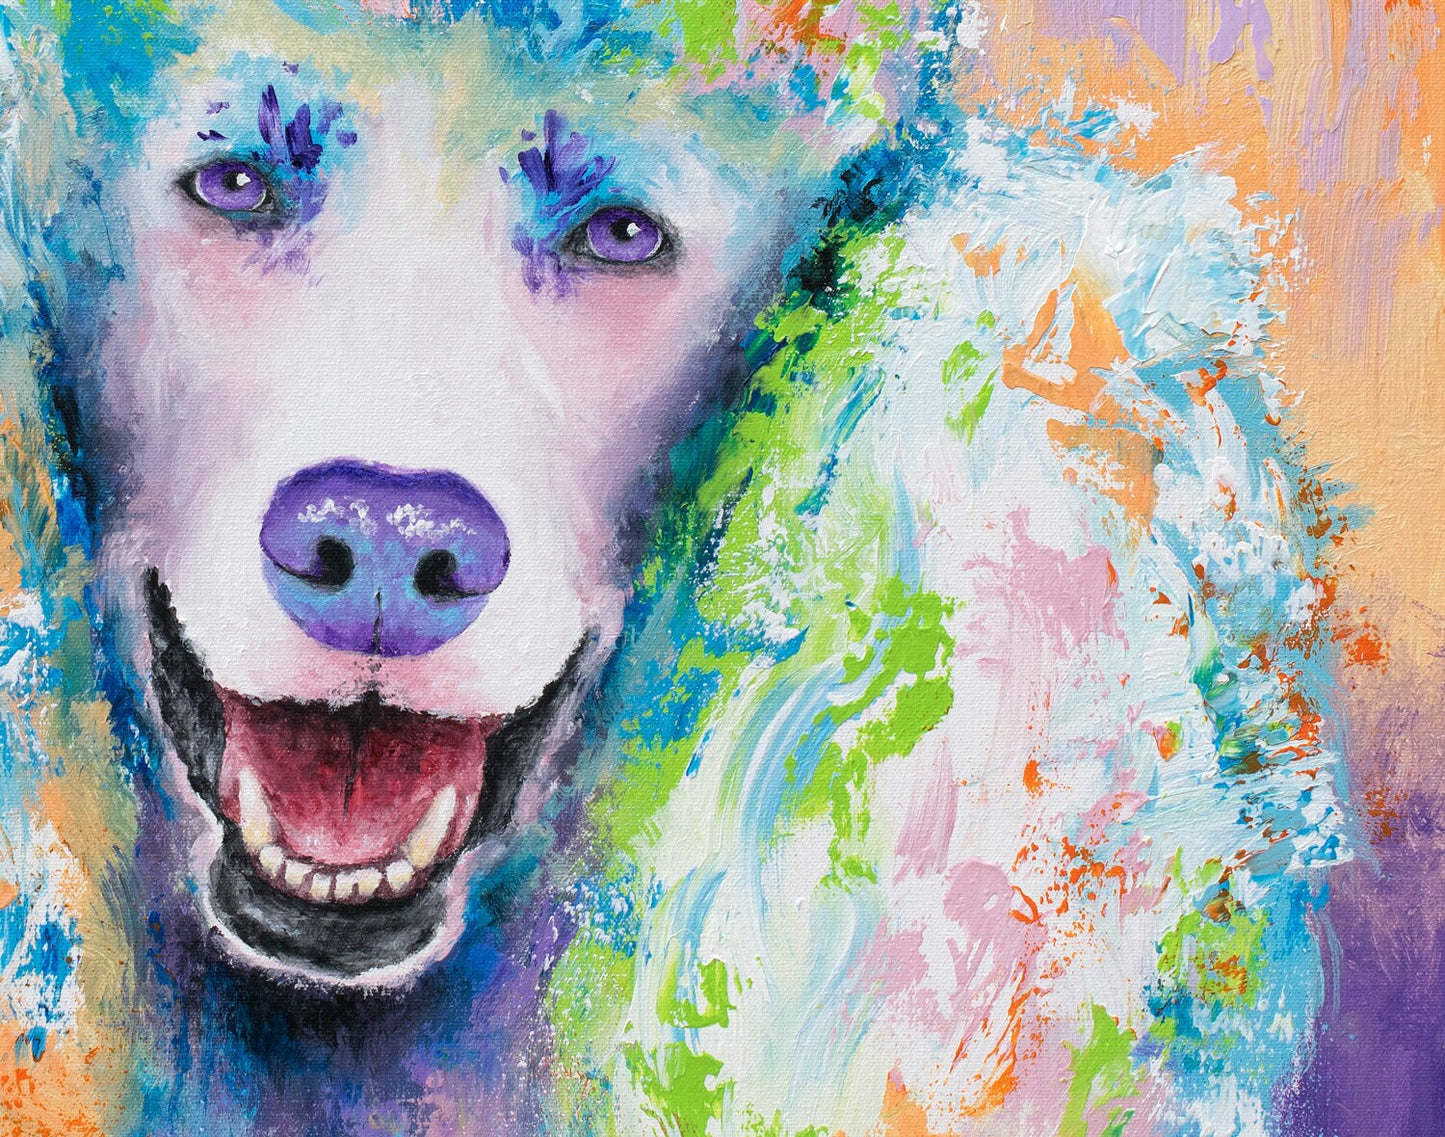 Poodle Art on Paper or Canvas - Print of Colorful Standard Poodle Painting by Krystle Cole